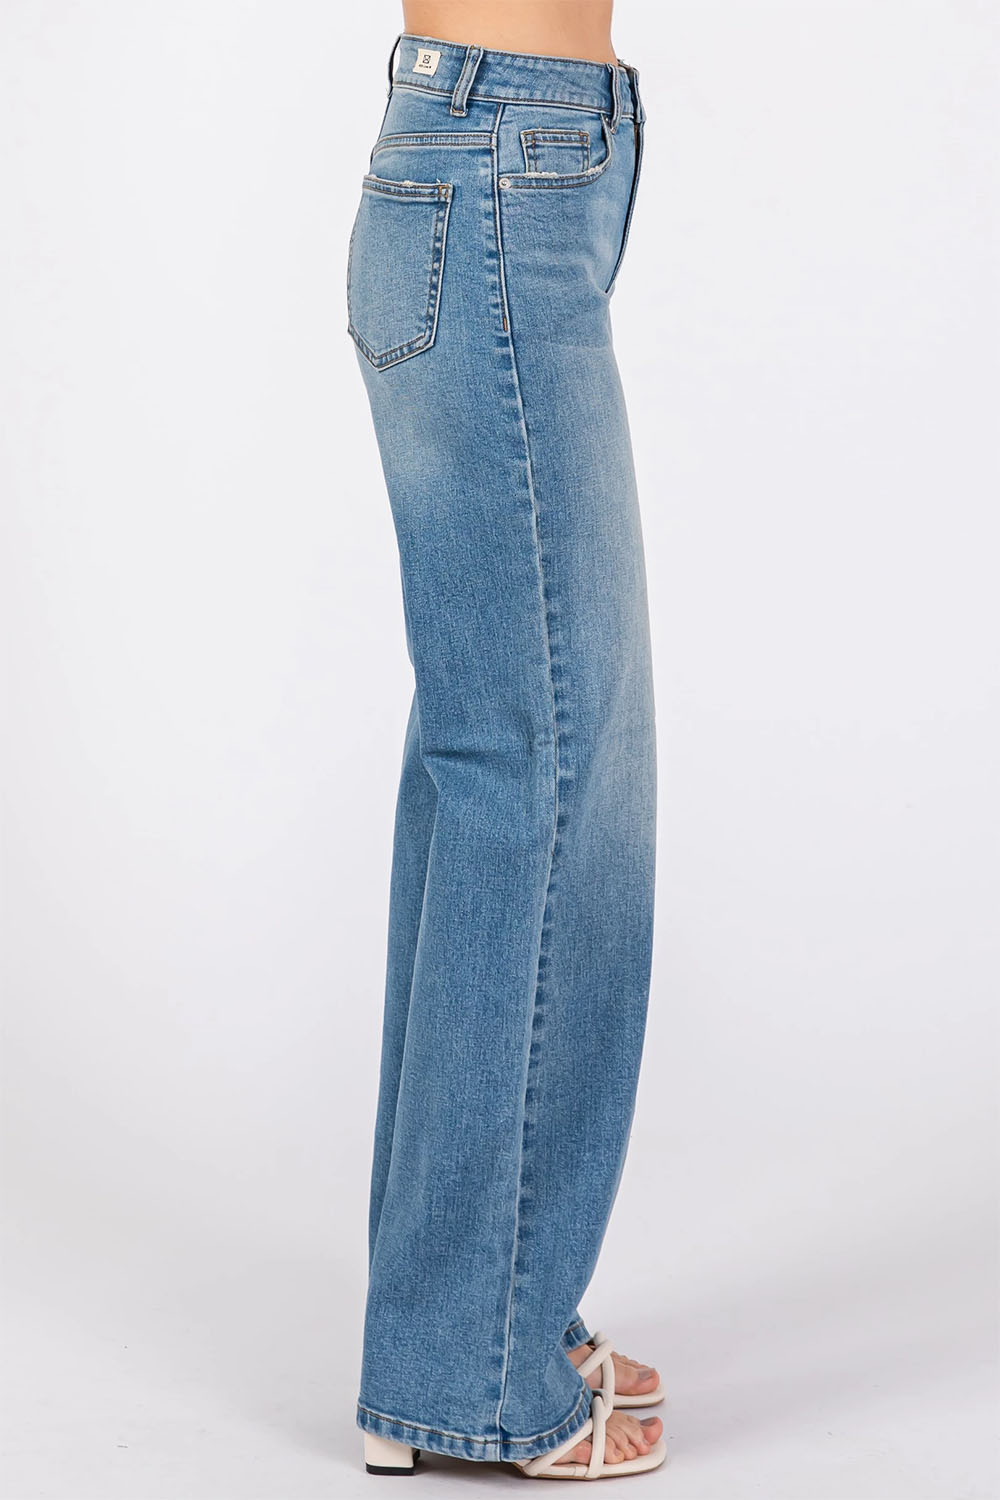 Letter to Juliet - Almost Rigid Highrise Slouchy Jean - Medium - Side